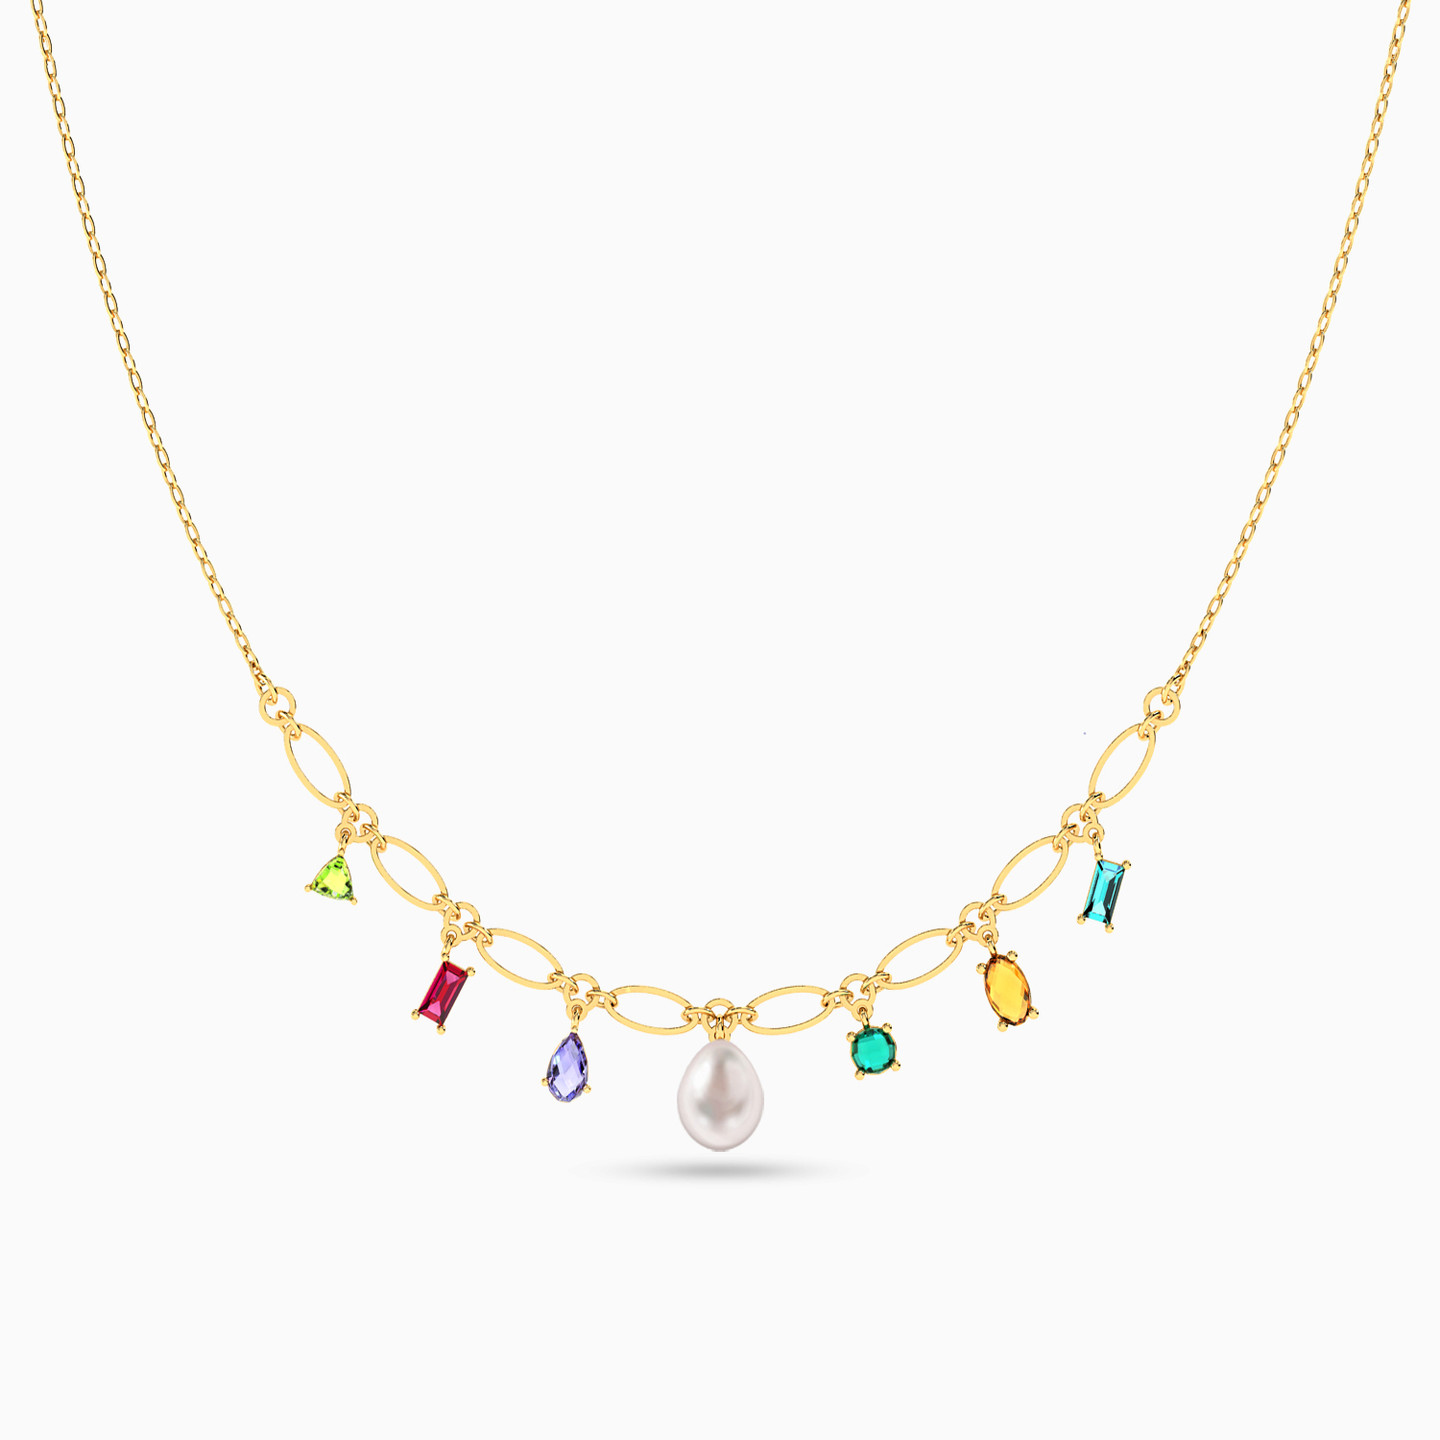 18K Gold Pearls & Colored Stones Charms Necklace